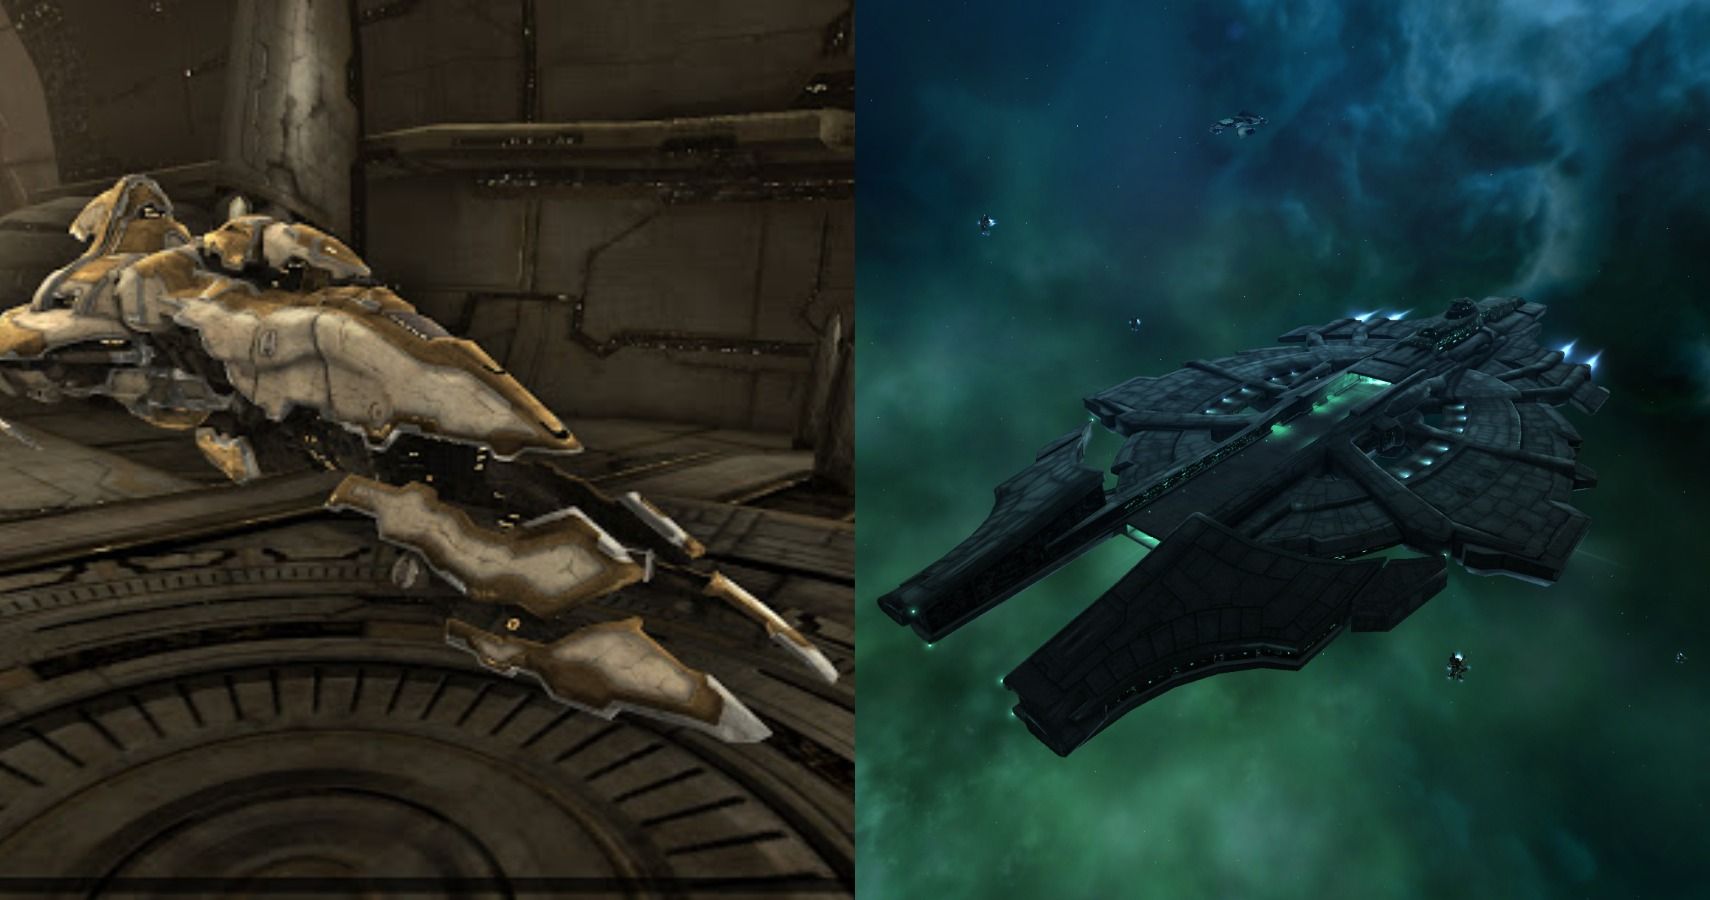 Buy ISK, Ships and Items in Eve online